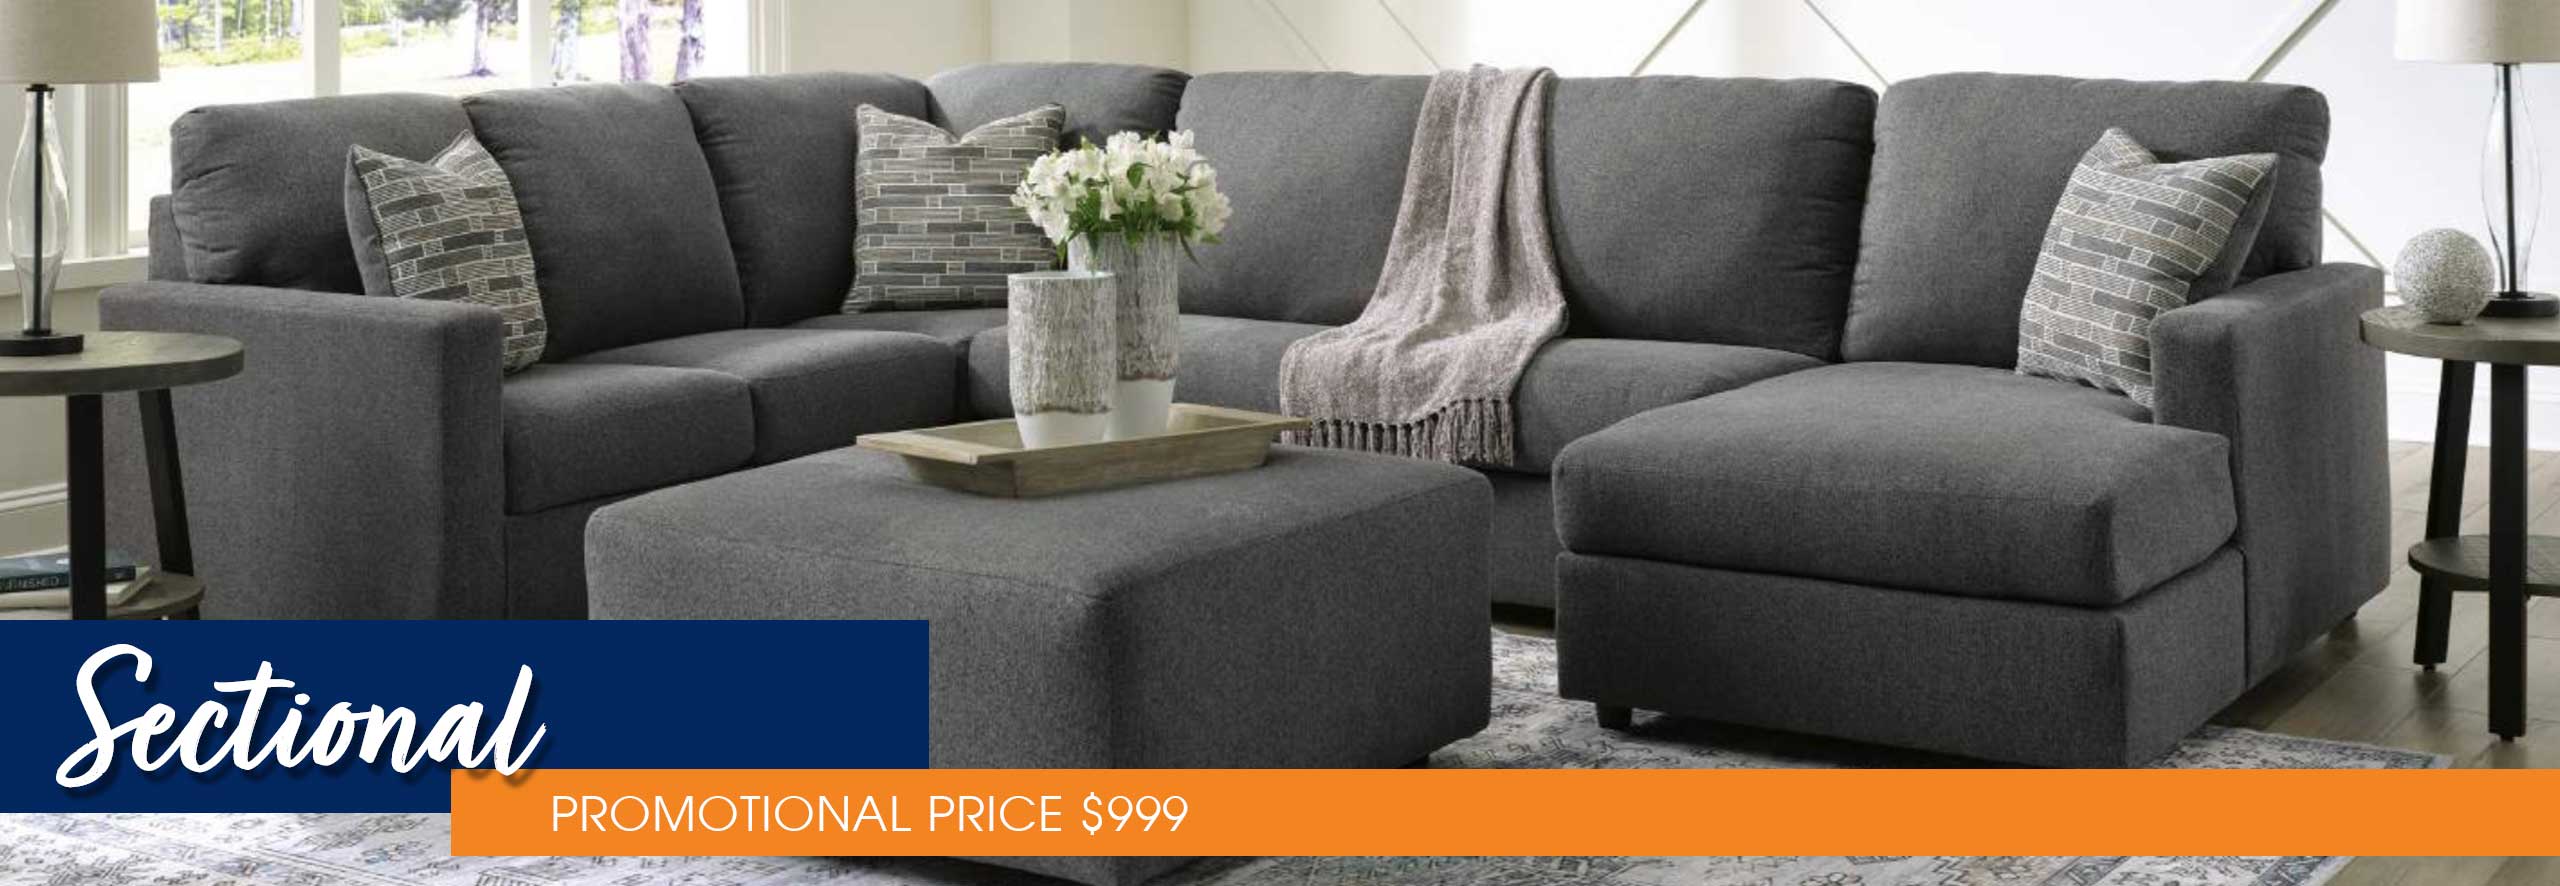 Sectional - Promo Price $999 - Shop In-Store